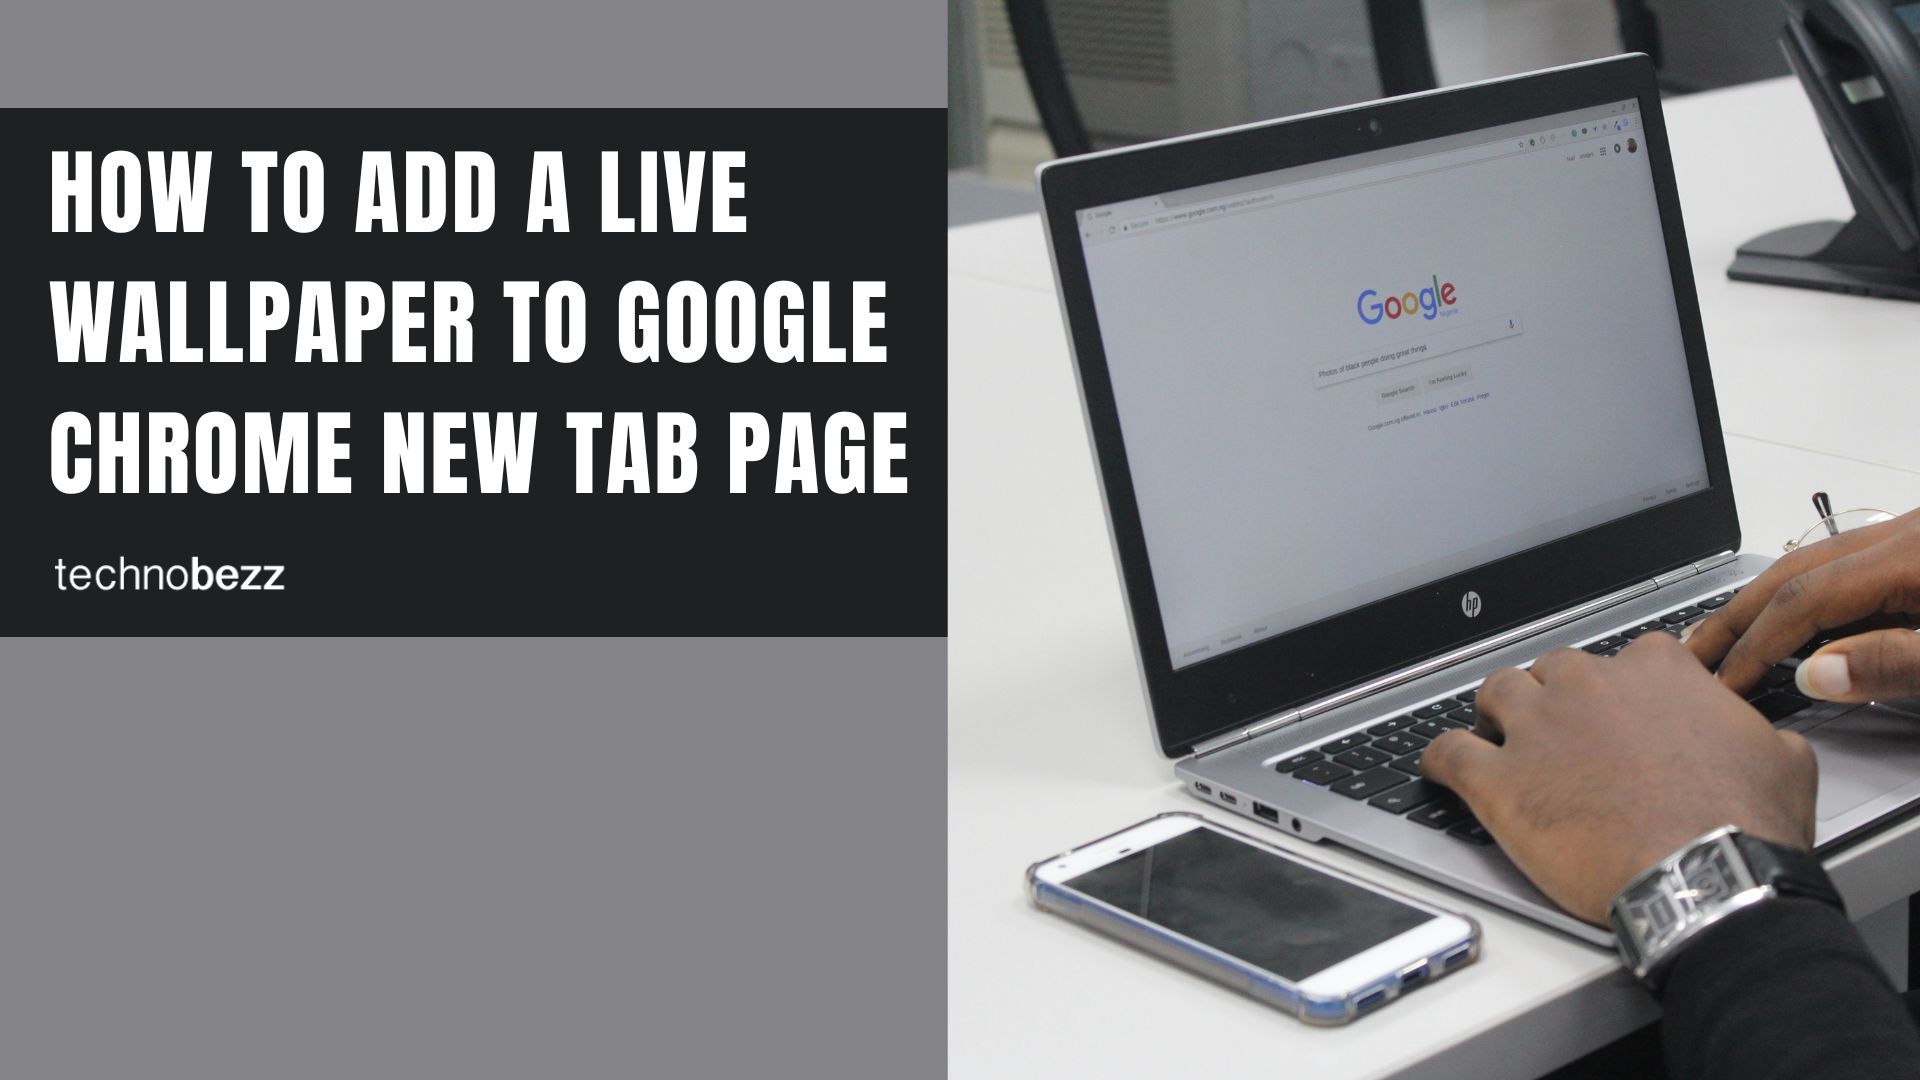 How To Add A Live Wallpaper To Google Chrome New Tab Page - Technobezz